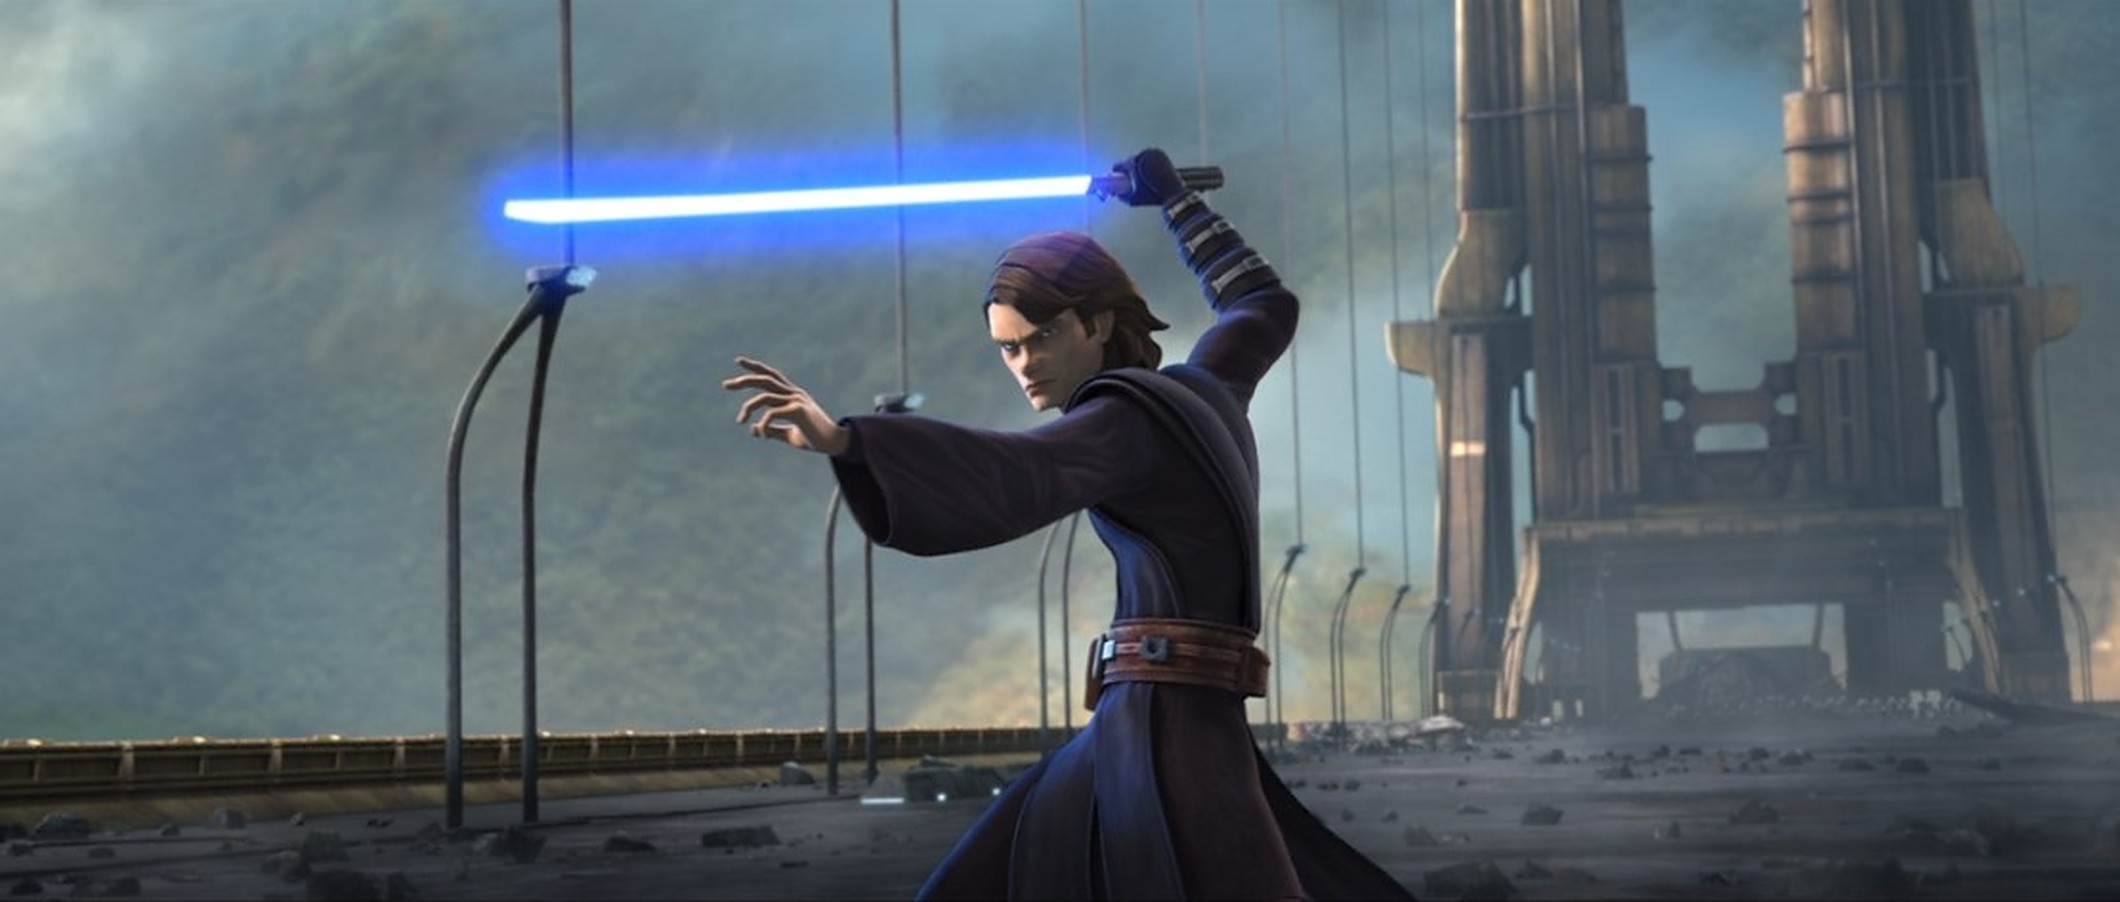 Anakin Skywalker from Star Wars: The Clone Wars holding a lightsaber.